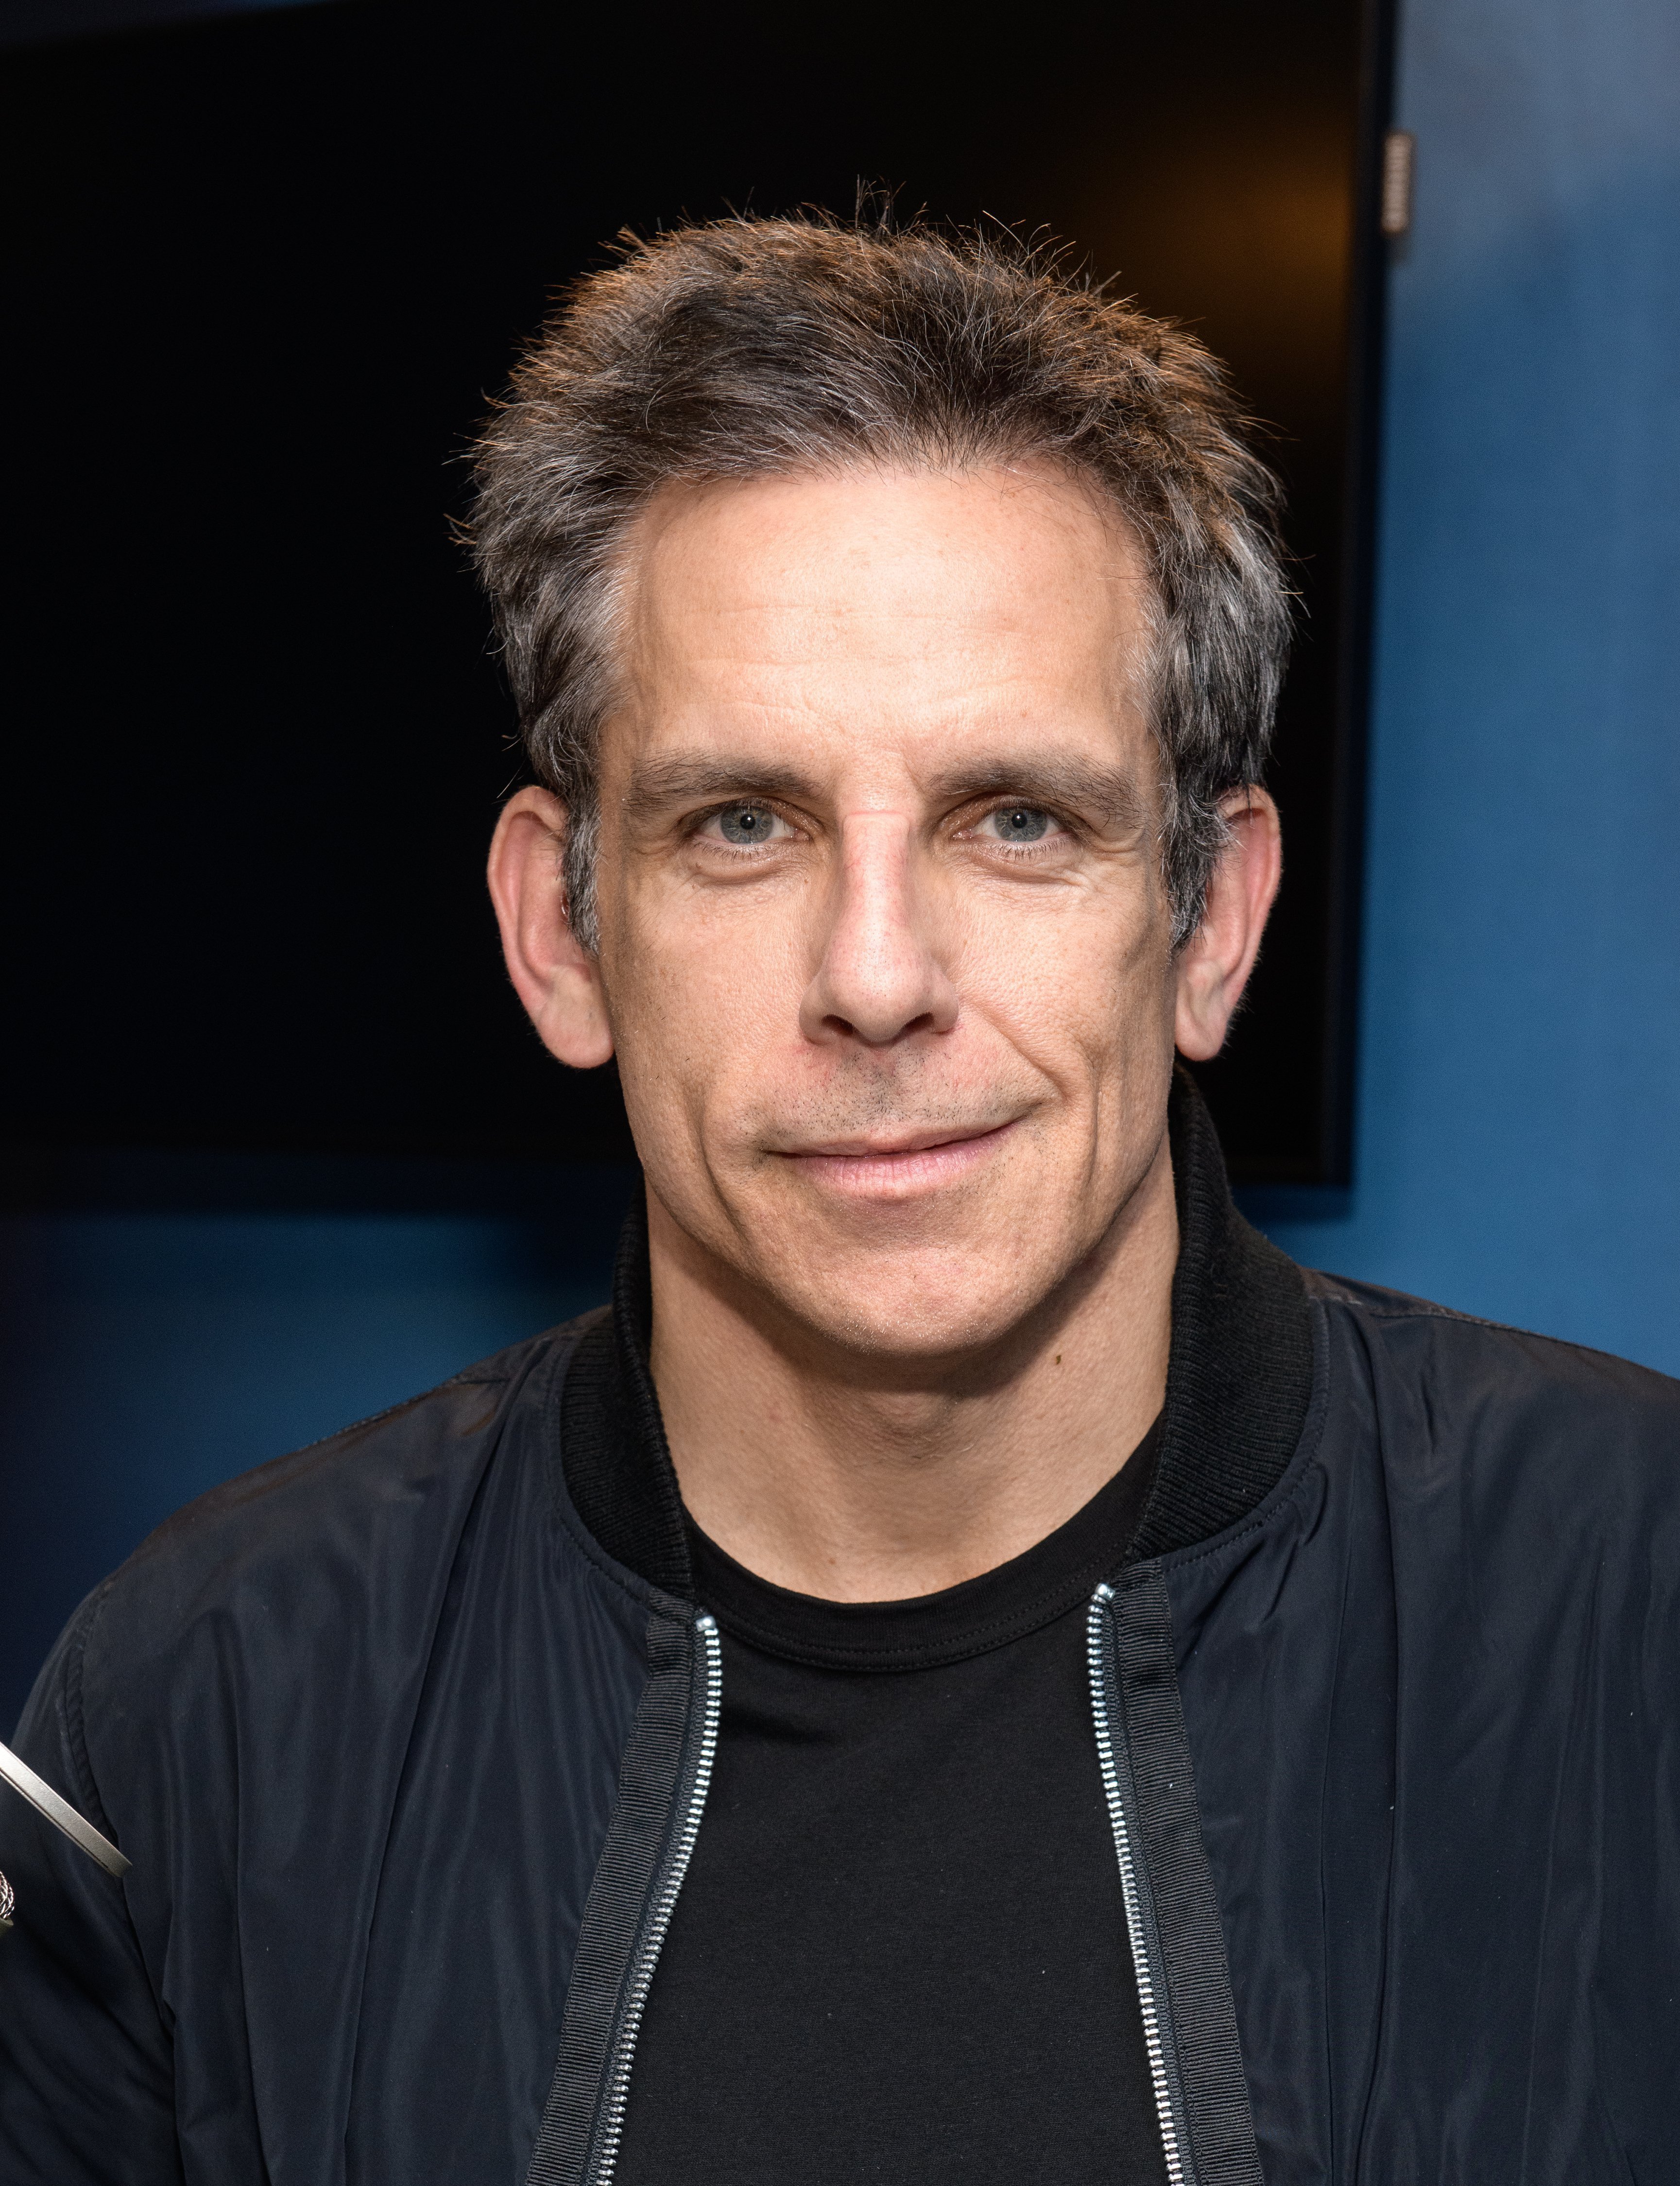 Ben Stiller visits SiriusXM Studios in New York City on May 6, 2019 | Photo: Getty Images